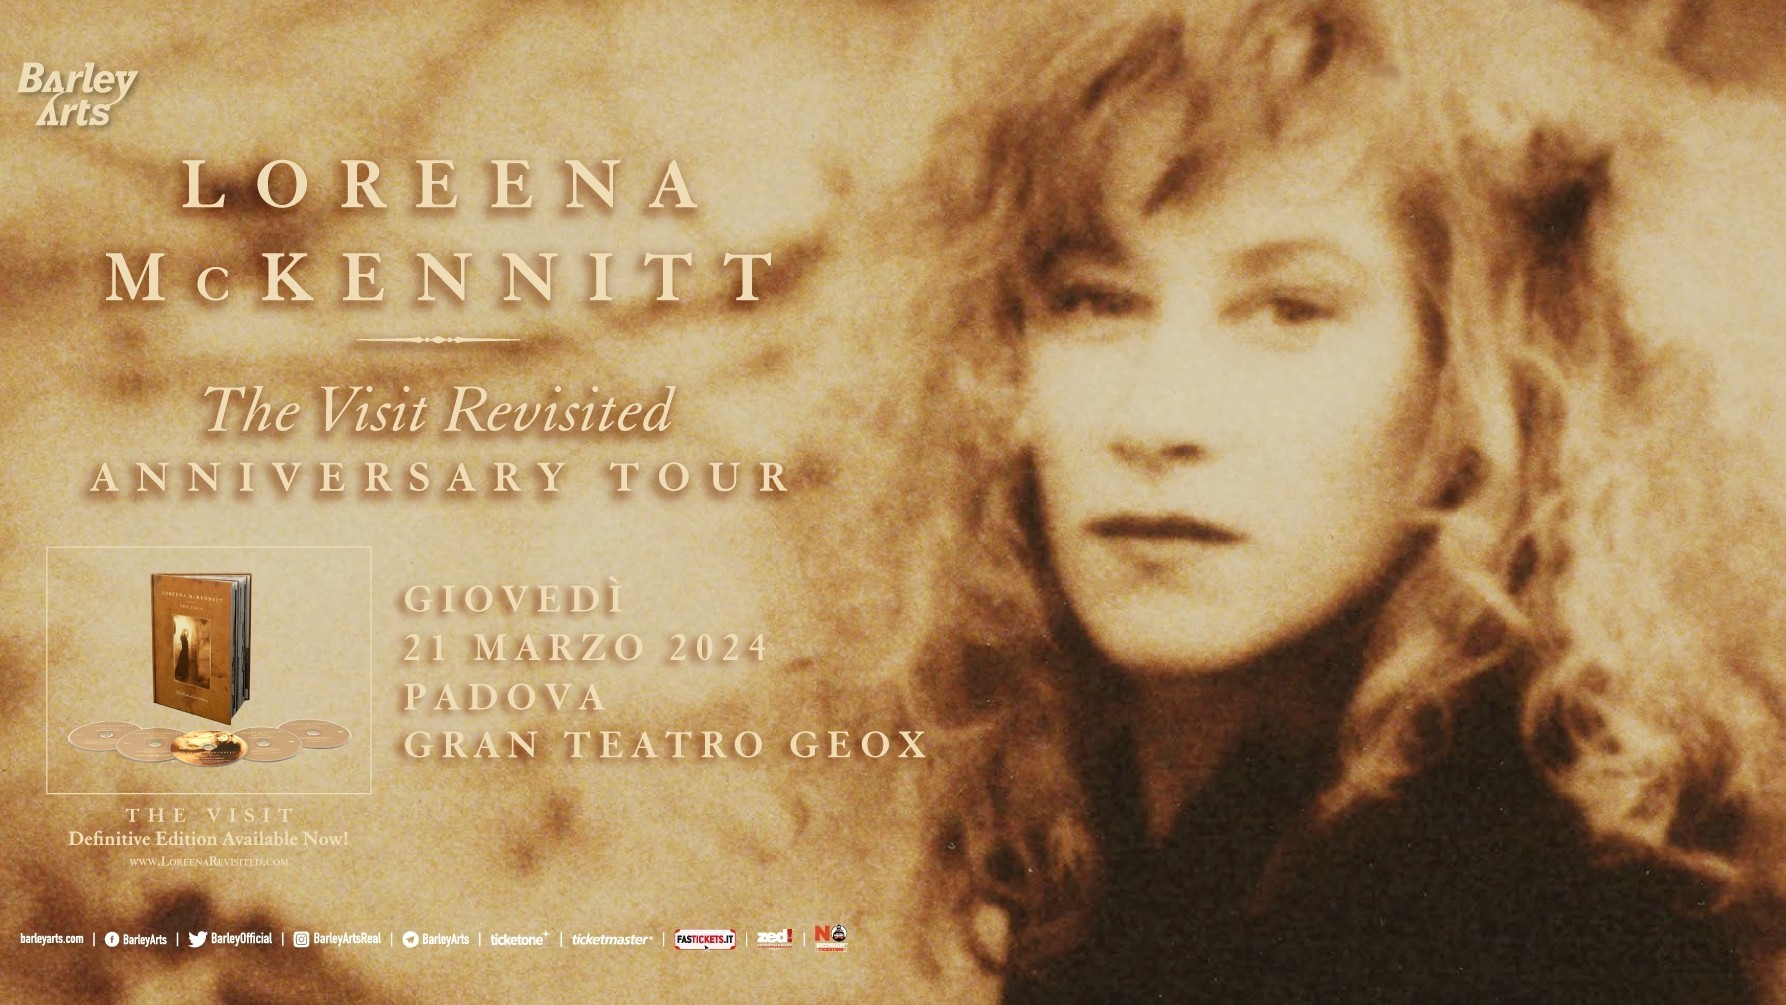 Loreena Mckennitt - Concepts & Synopsis "The Visit Revisited Tour"